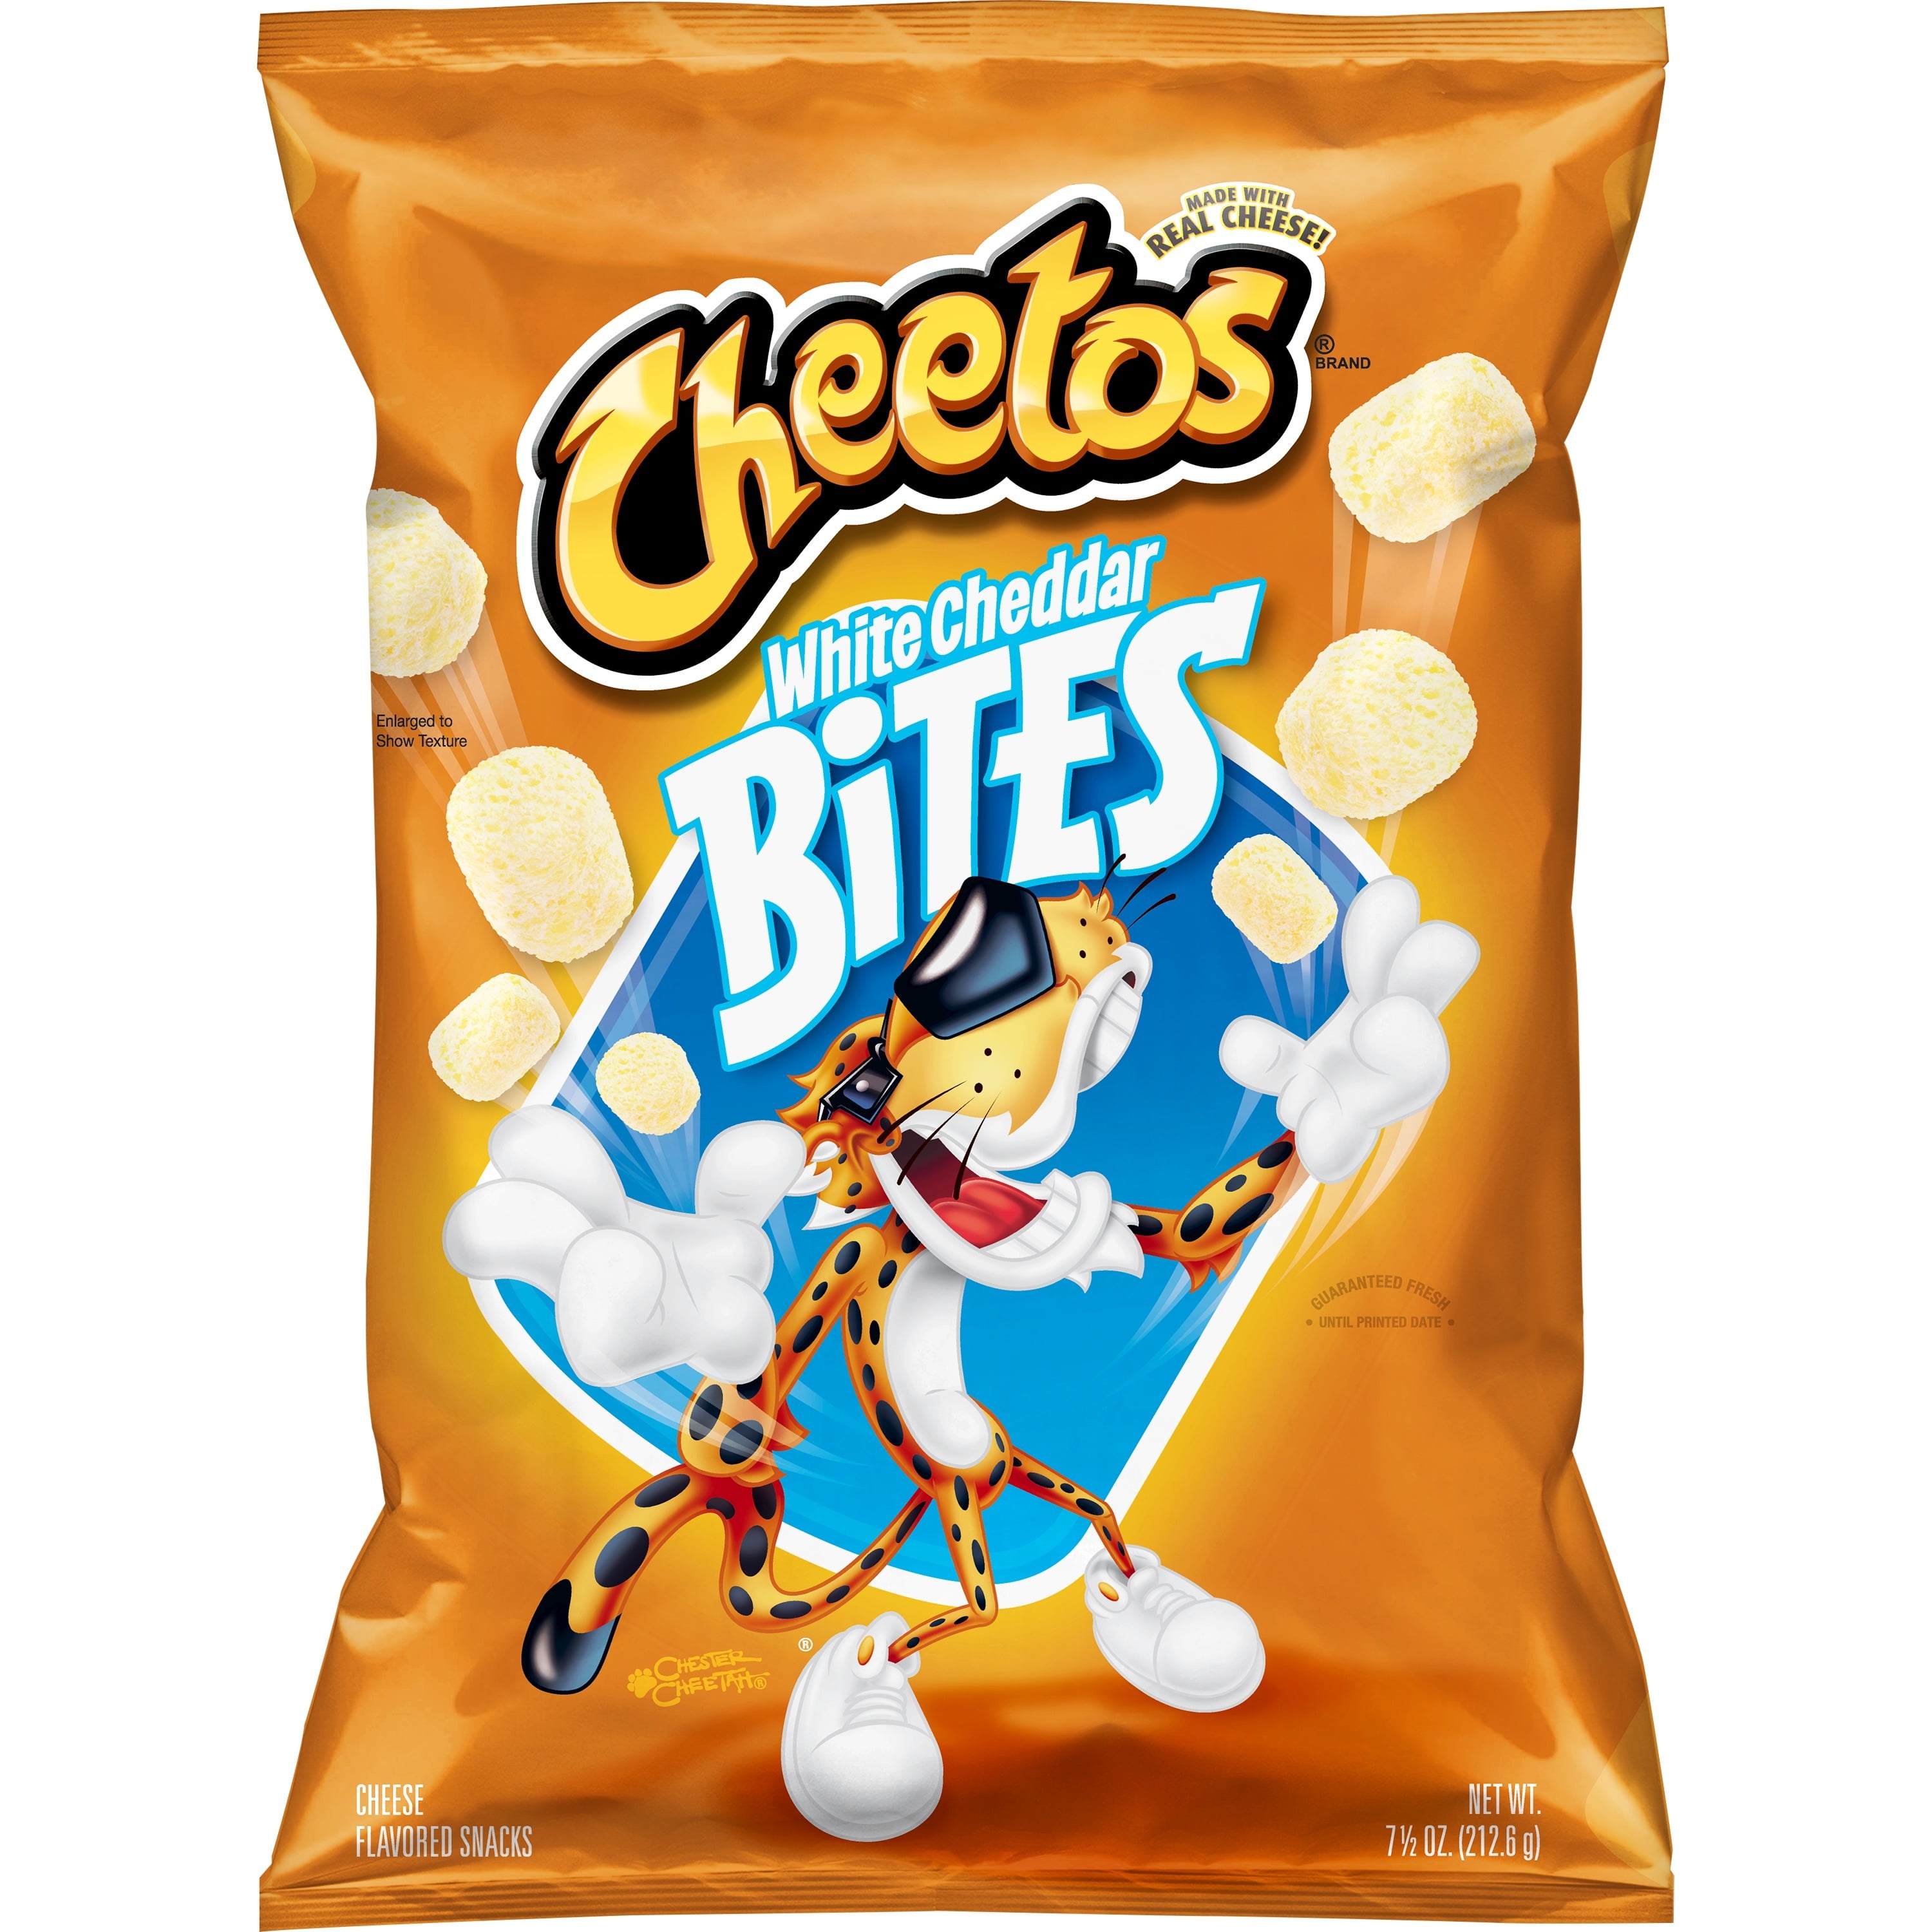 Cheetos Double Cheddar Cheese Flavored Egg Shaped Puffs, 7 oz